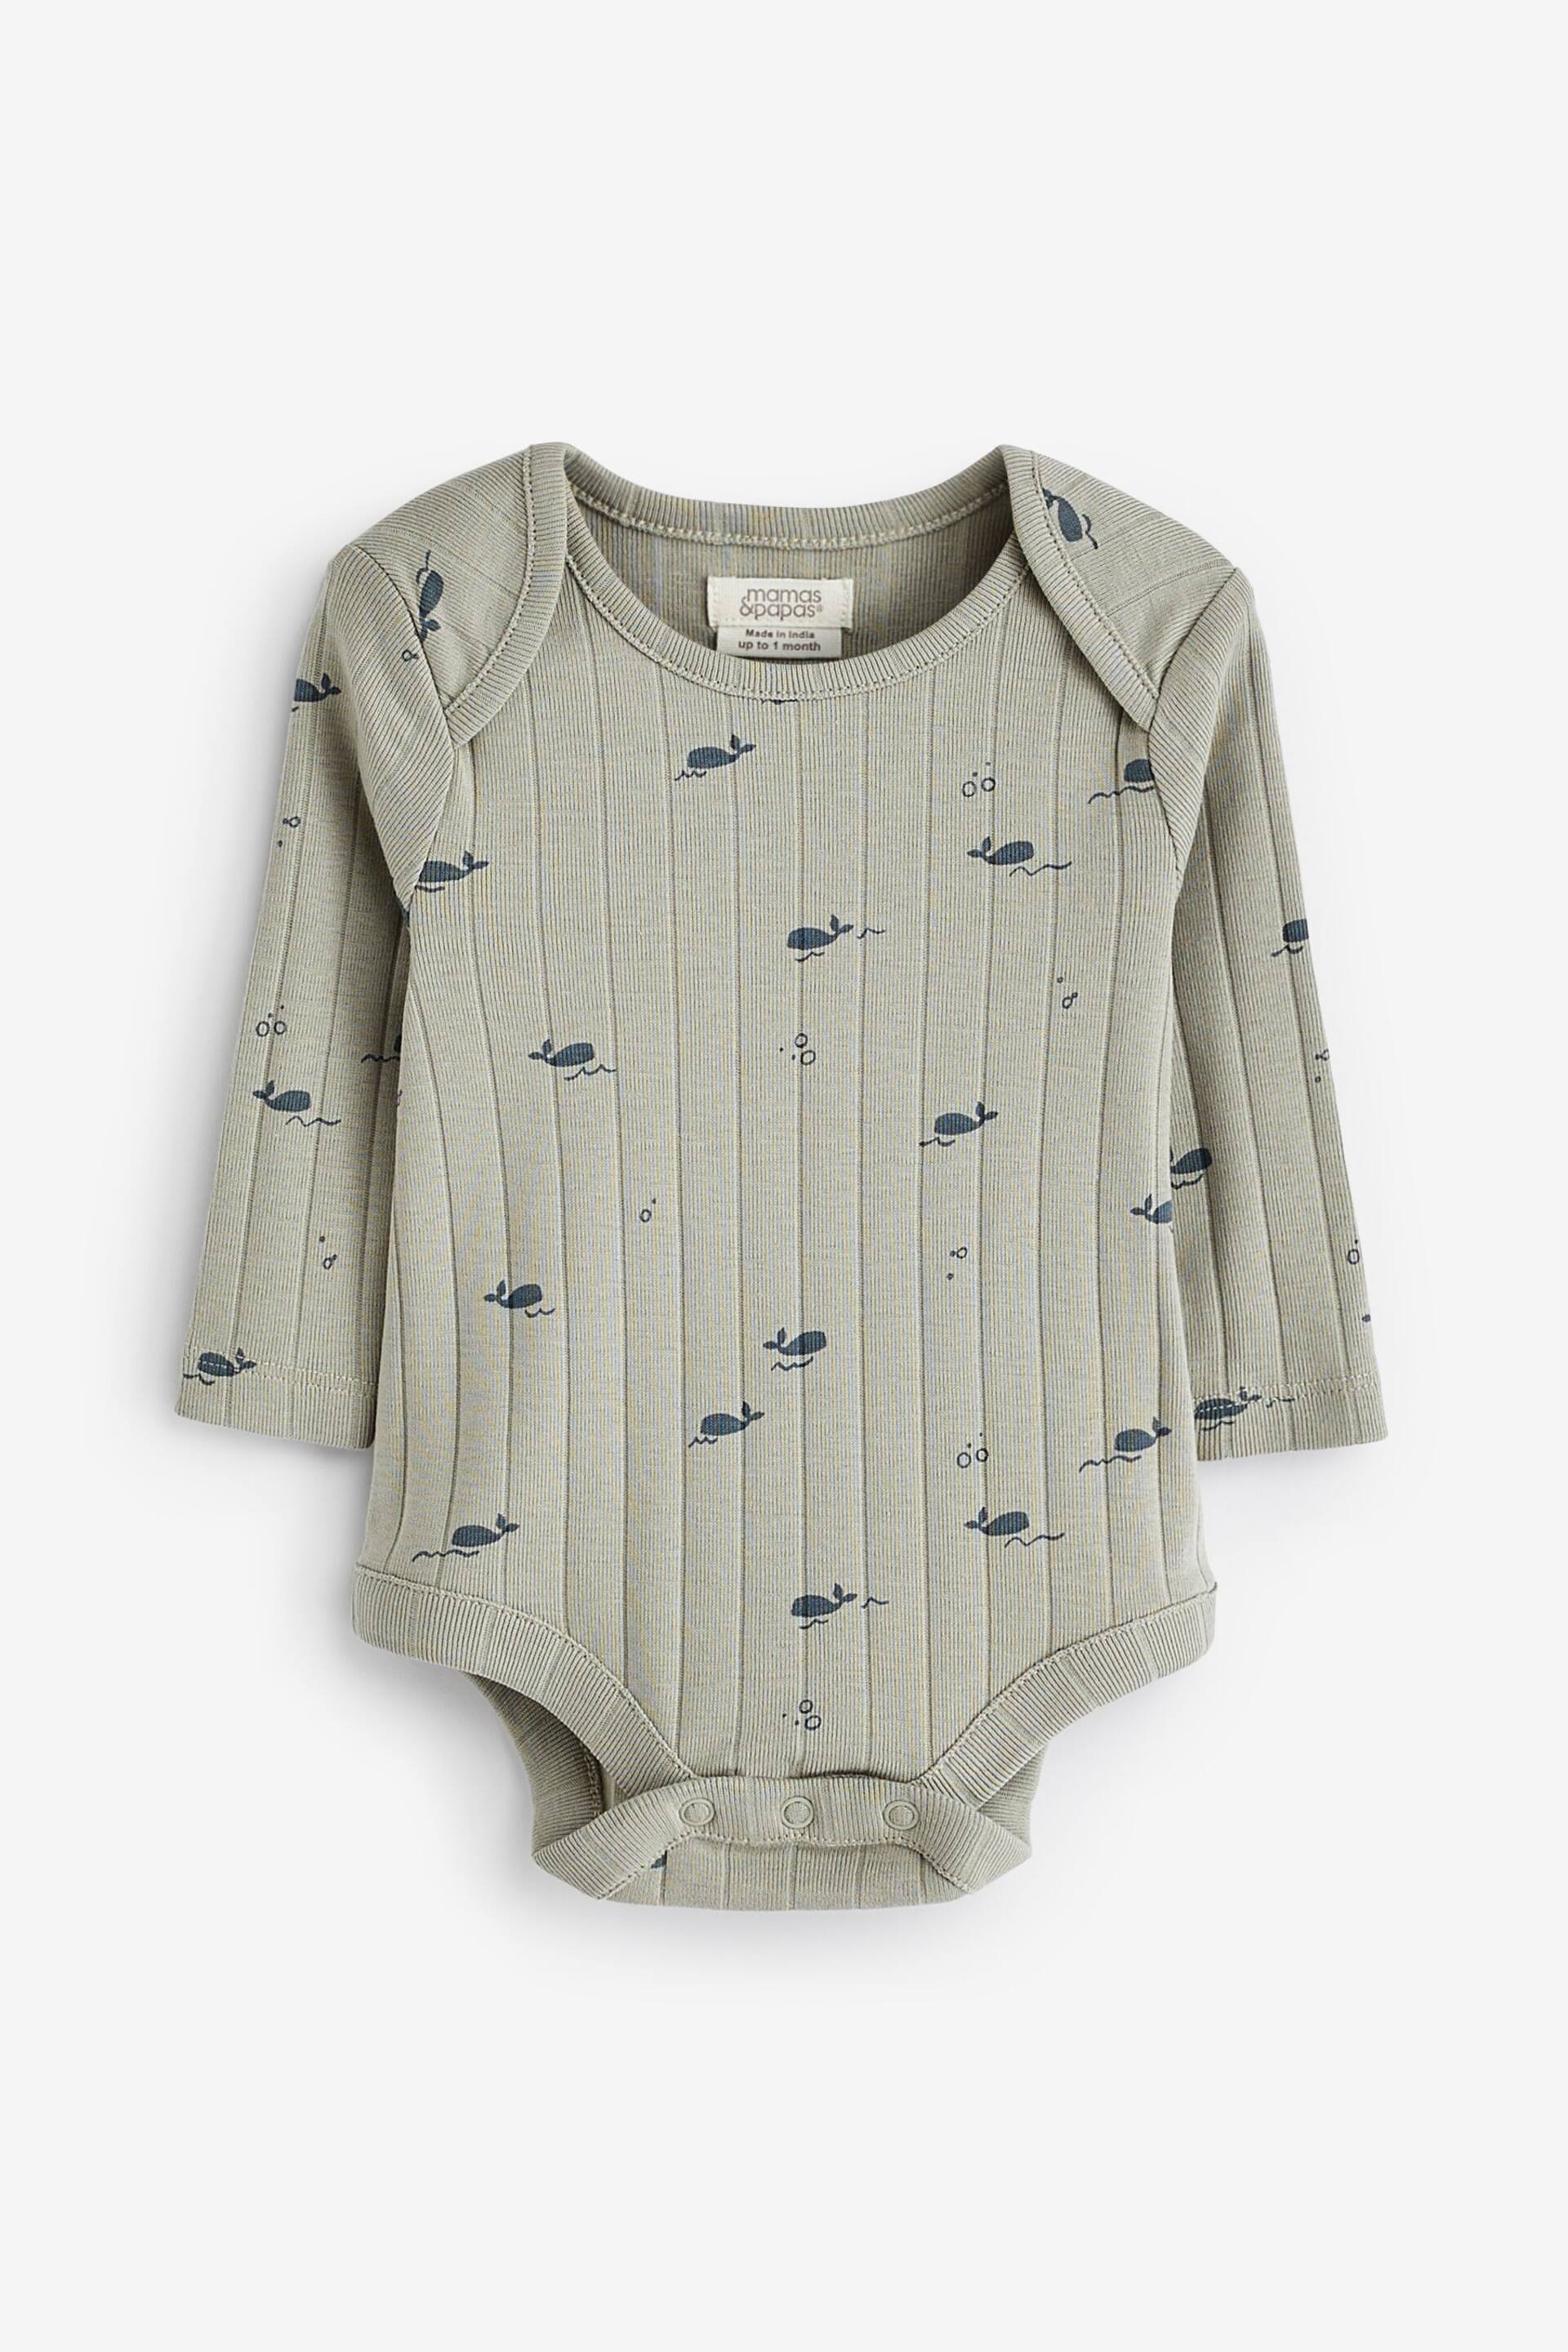 Mamas & Papas Grey Whale Print All In One Set 3 Piece - Image 2 of 4